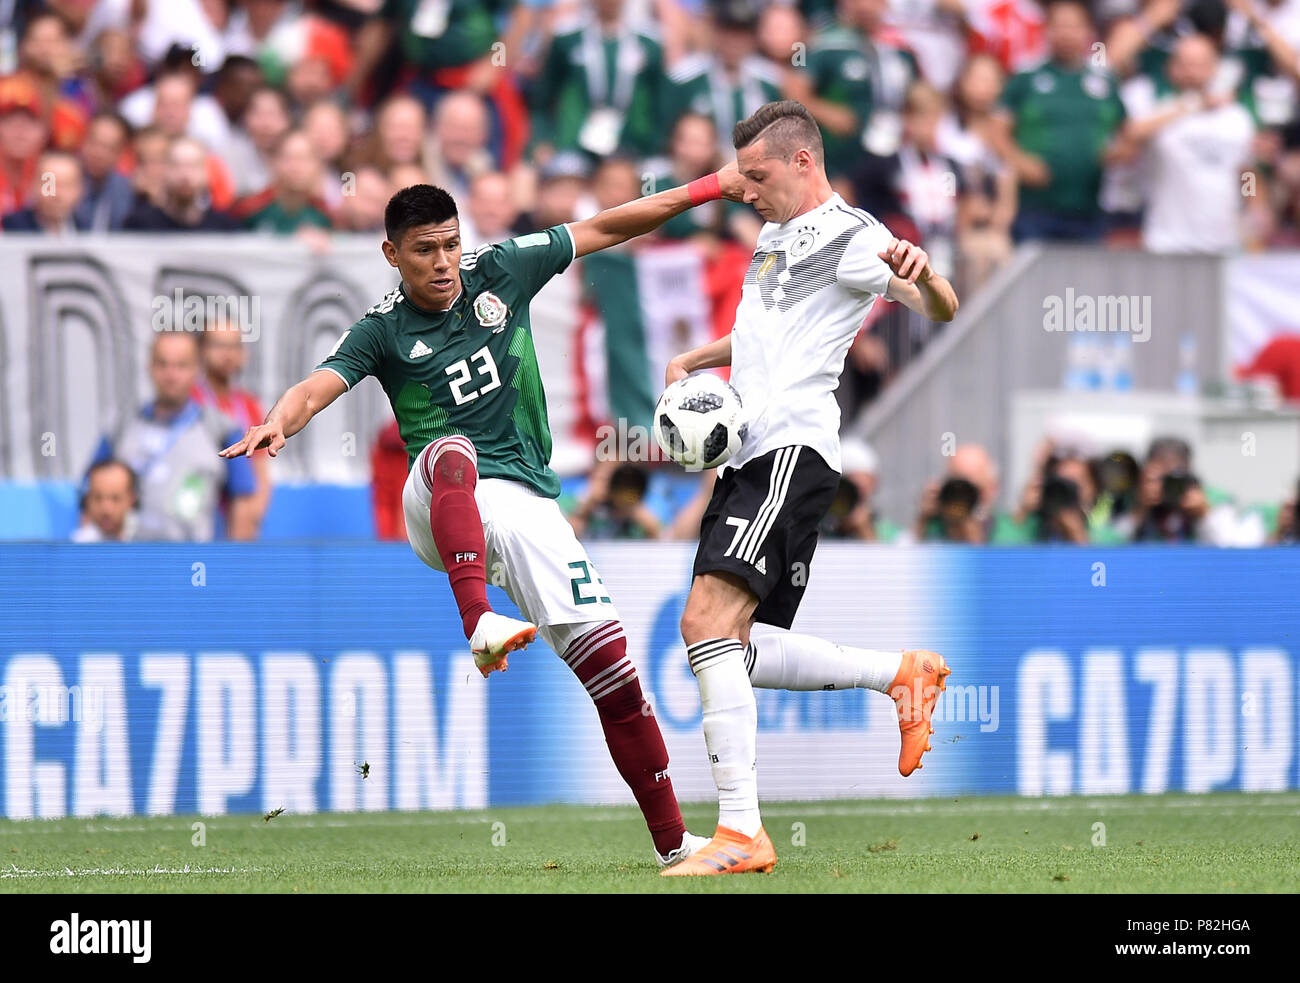 MOSCOW, RUSSIA - JUNE 17: Jesus Gallardo of Mexico competes with Julian Draxler of Germany during the 2018 FIFA World Cup Russia group F match between Germany and Mexico at Luzhniki Stadium on June 17, 2018 in Moscow, Russia. (Photo by Lukasz Laskowski/PressFocus/MB Media) Stock Photo